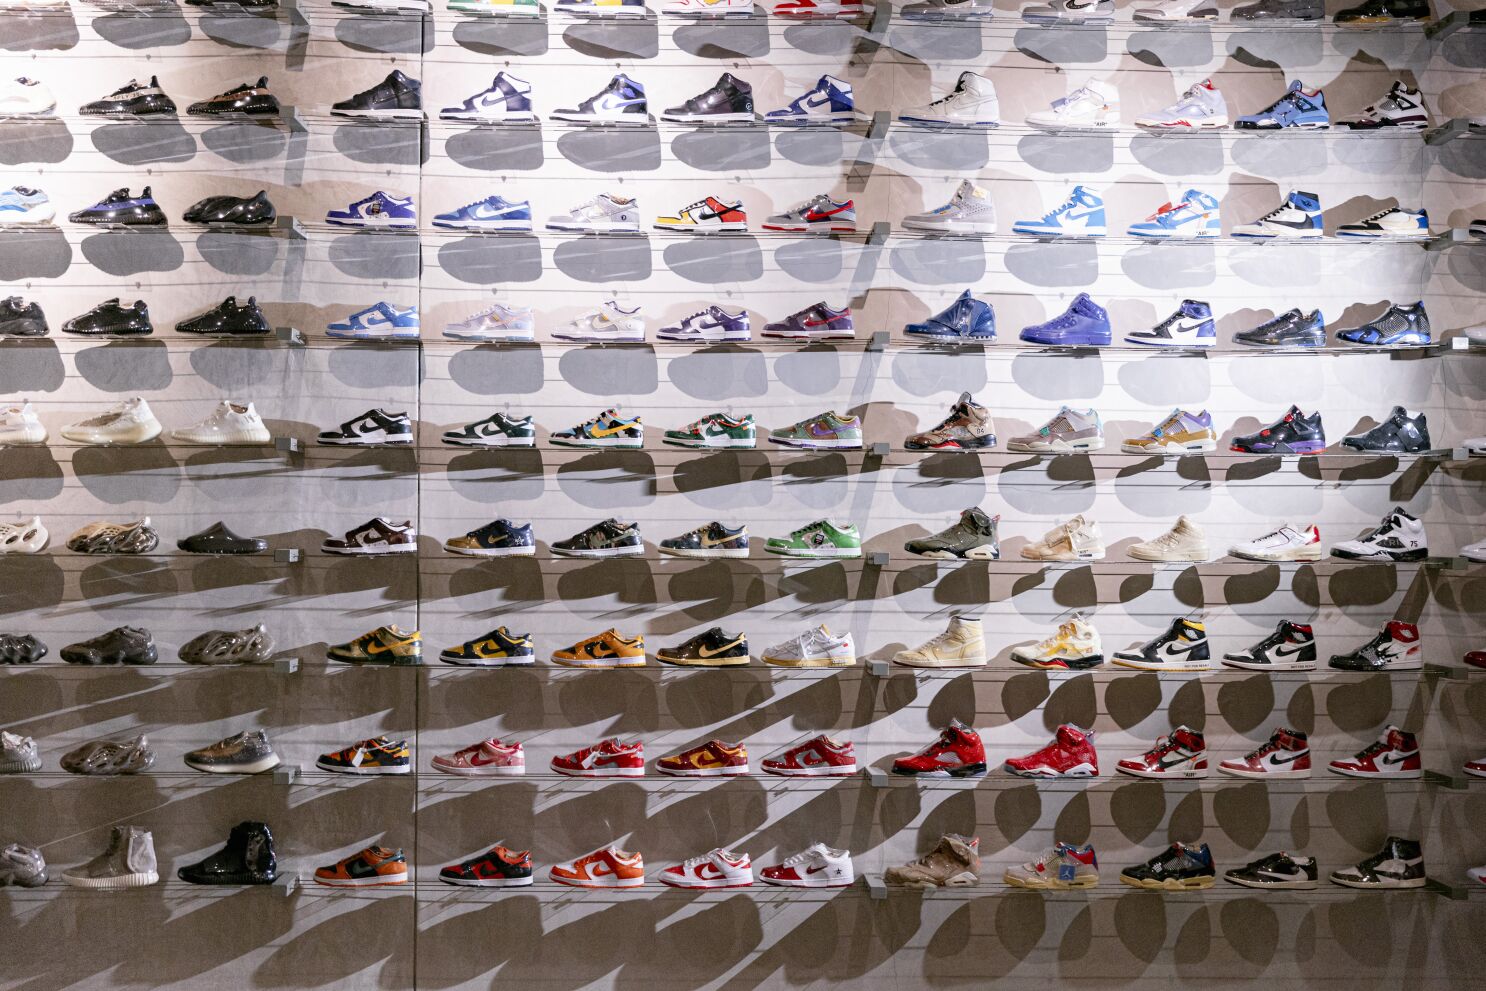 Flight Club Los sneaker shop reopens after 2 years - Los Times